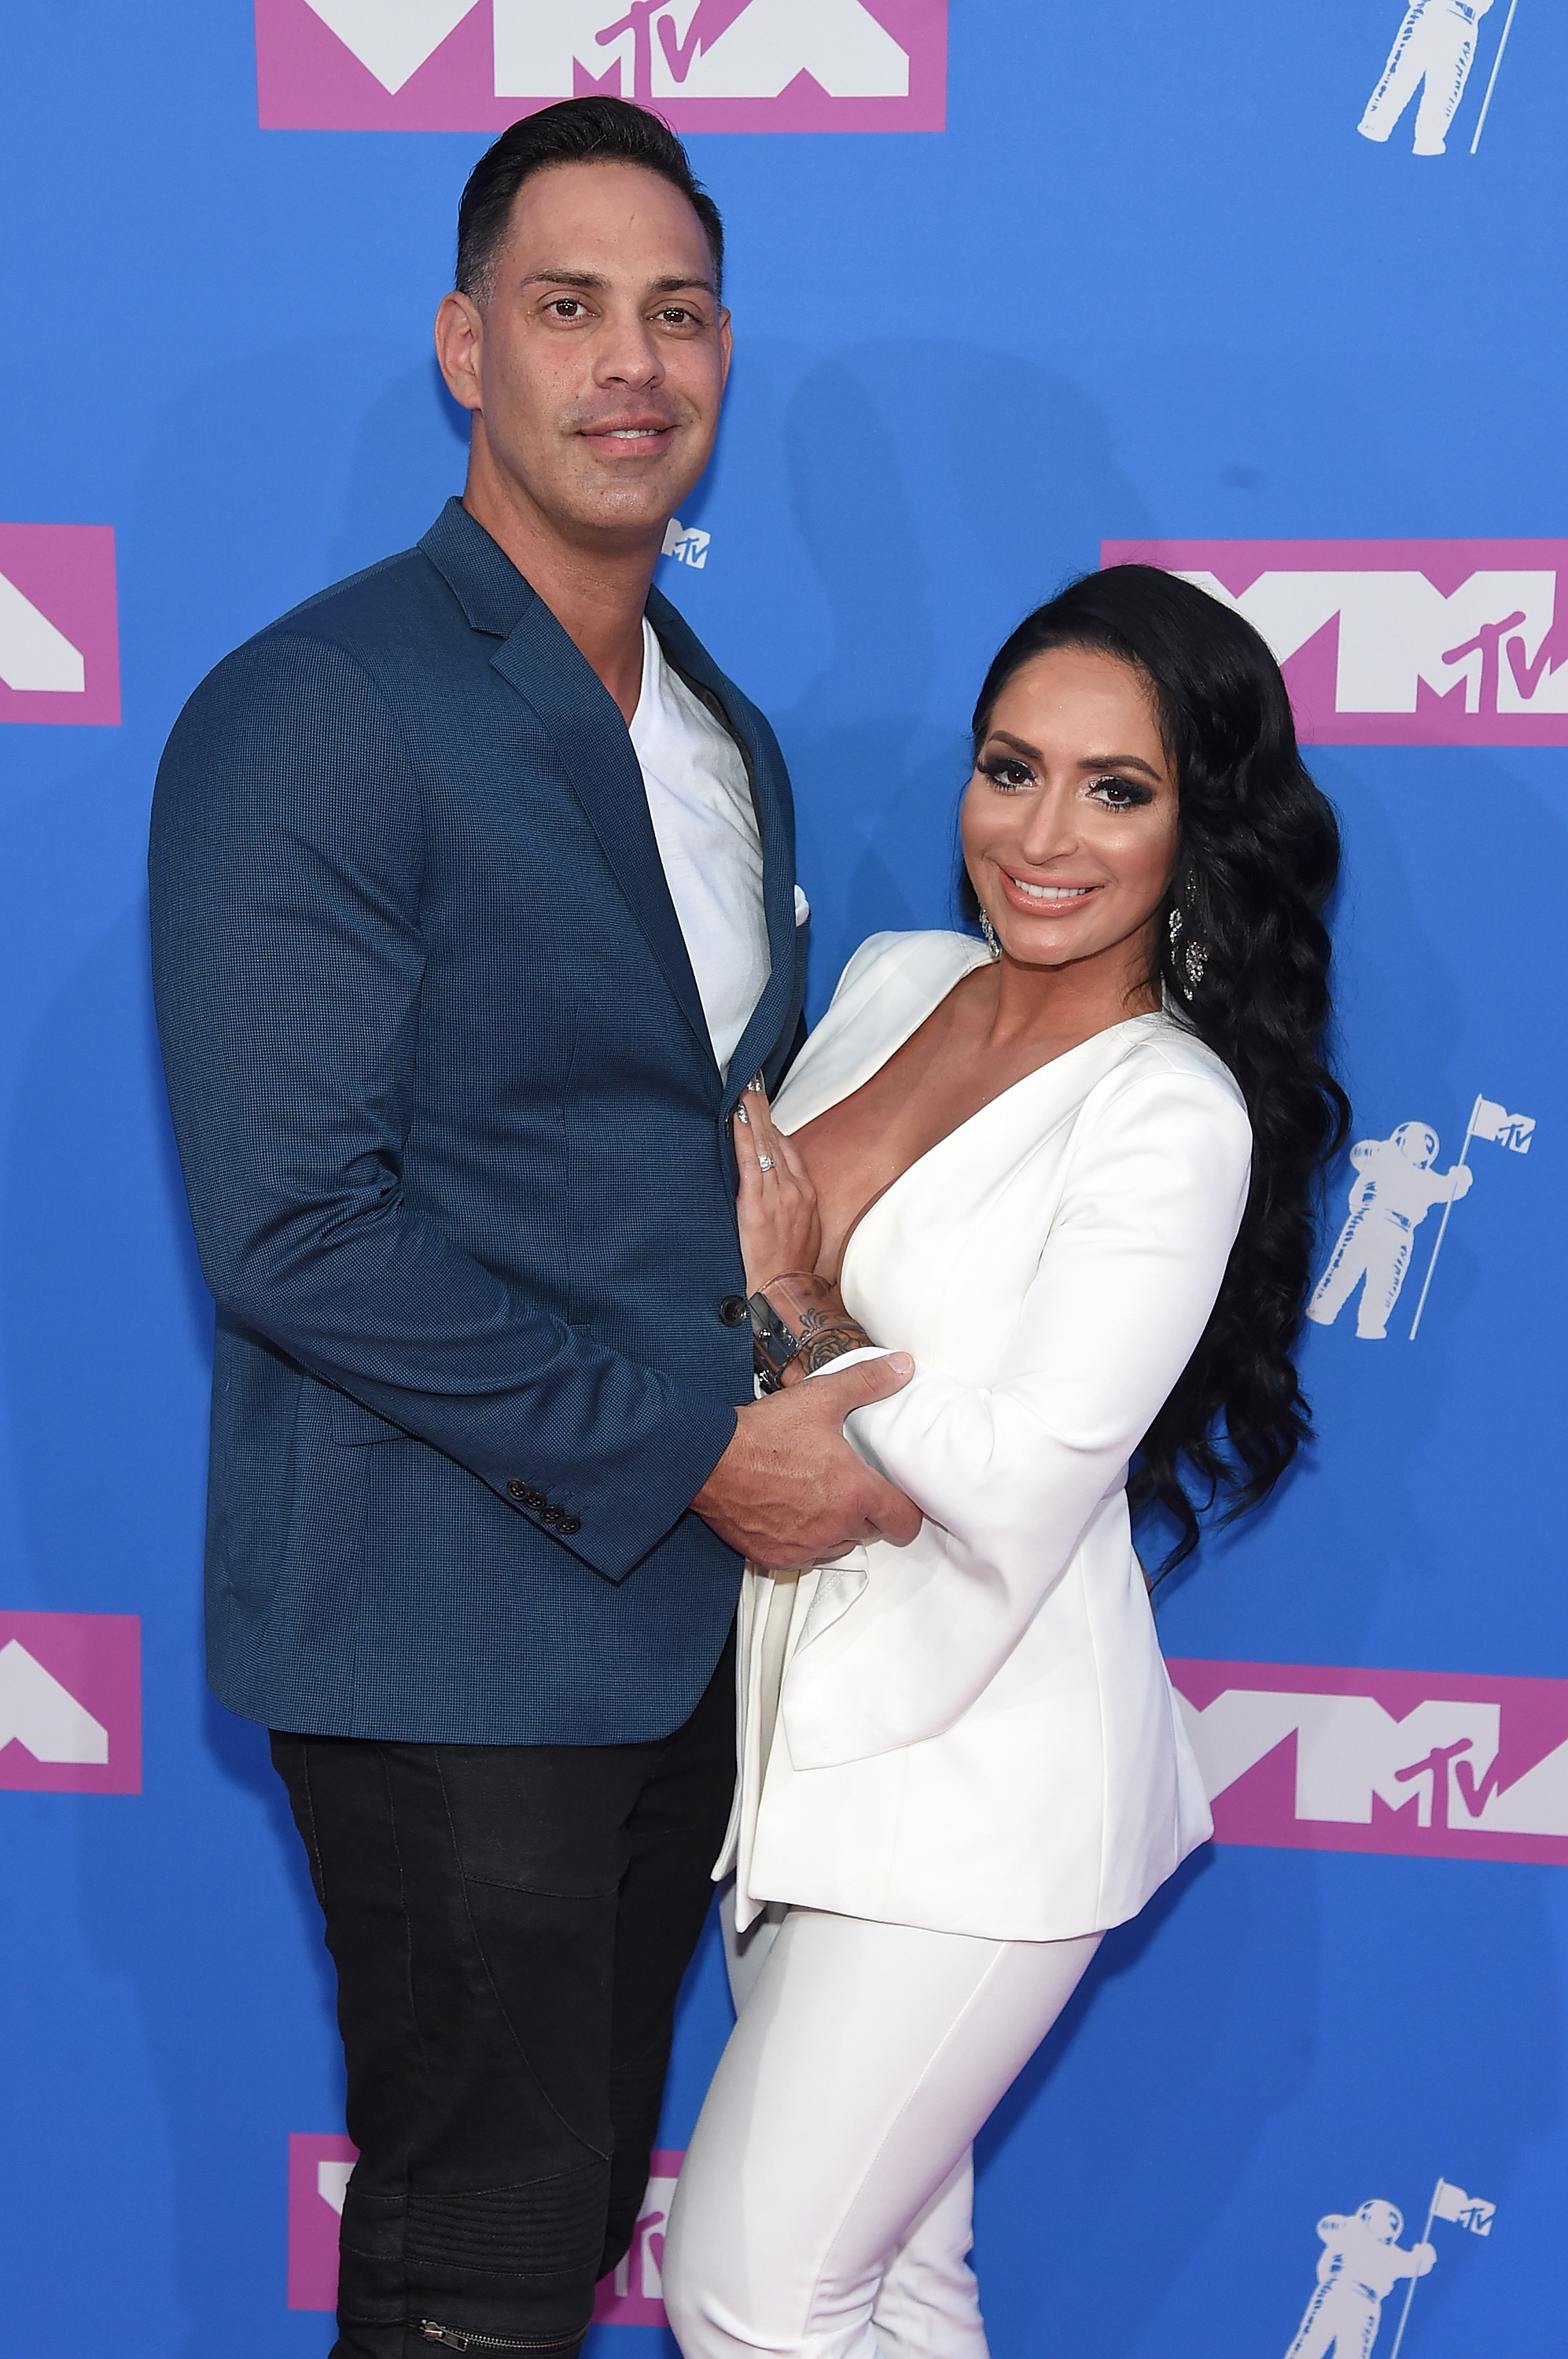 'Jersey Shore' Star Angelina Relies on Fiance During Depression